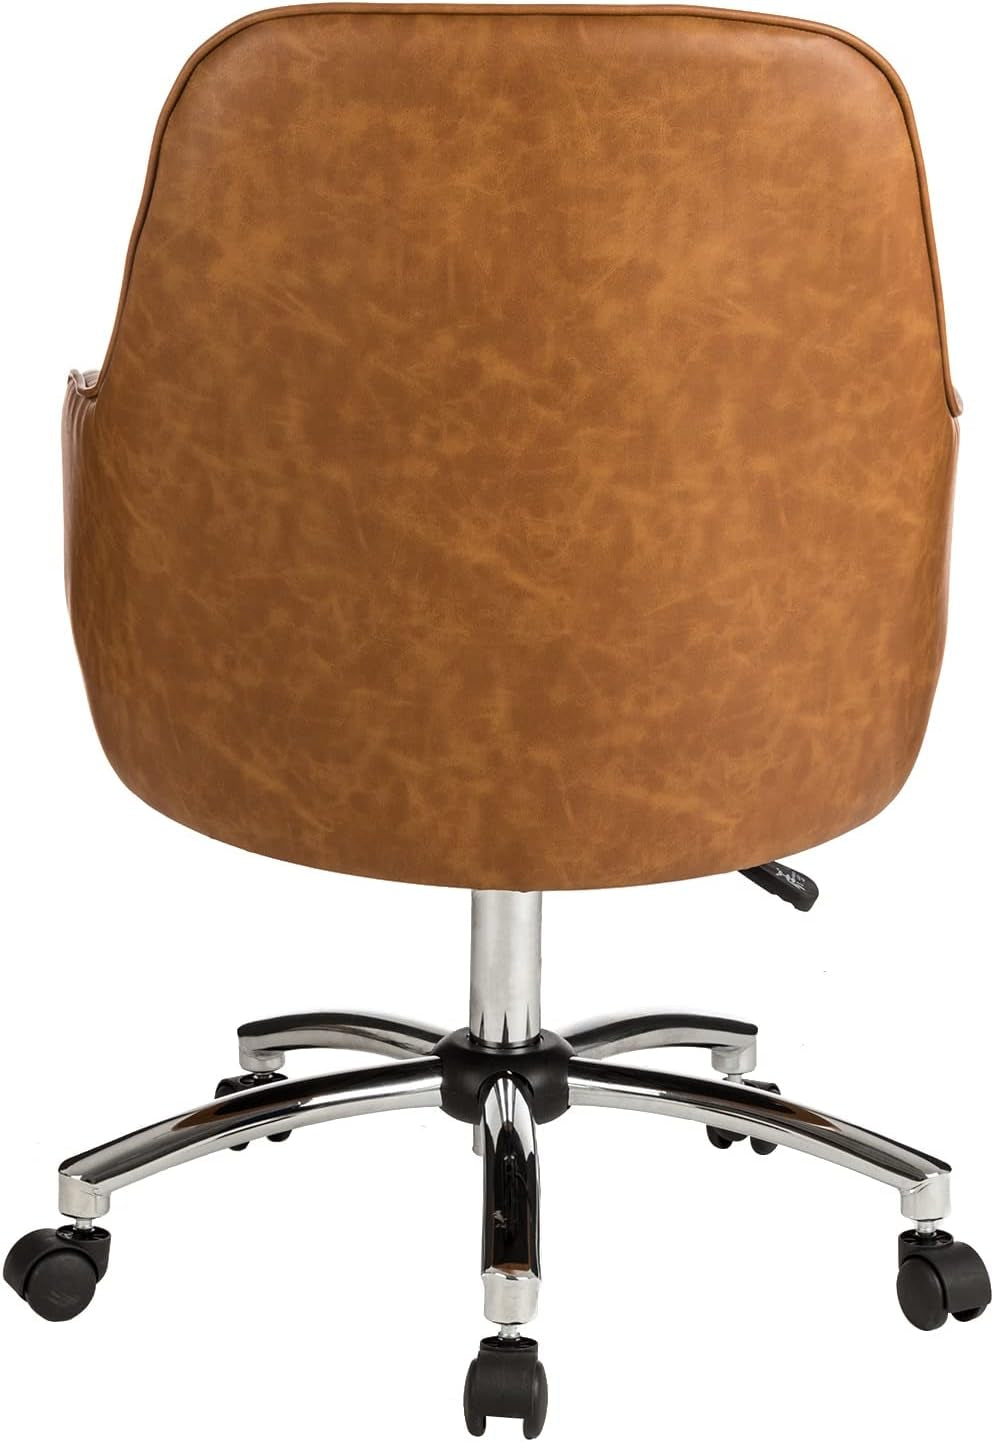 Home Office Chair with Wheels Comfortable Modern Mid-Back Computer Desk Chair PU Leather Swivel Adjustable Upholstered Computer Task Chair Executive Chair with Soft Seat, Caramel